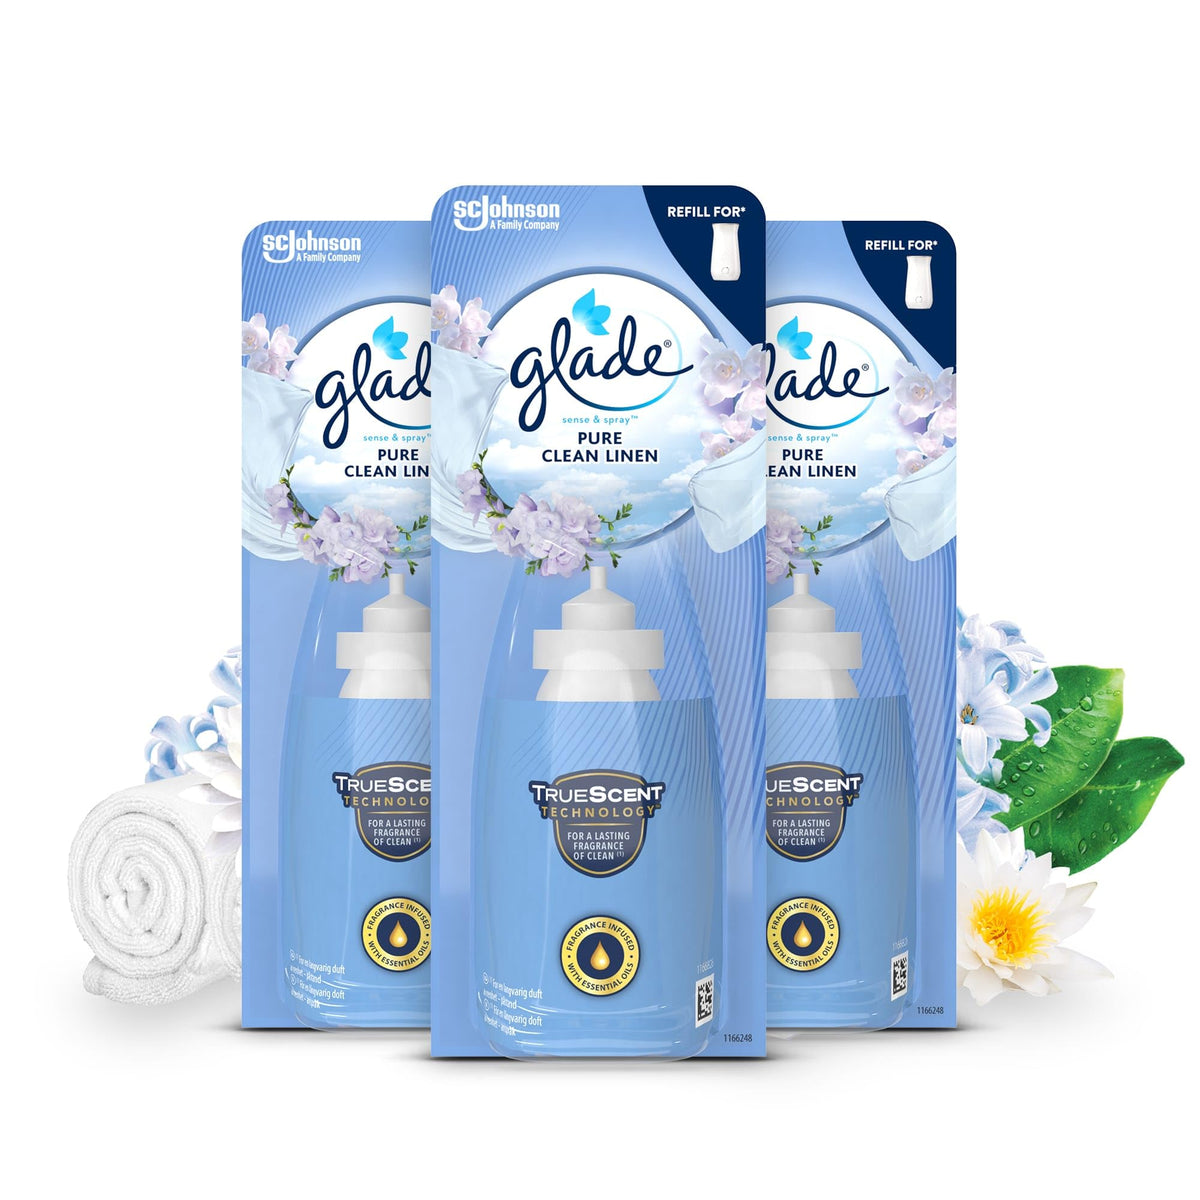 Glade Sense & Spray Air Freshener Refill, Motion Activated Automatic Room Spray and Odour Eliminator for Home, Clean Linen, 3 Refills (3 x 18ml)